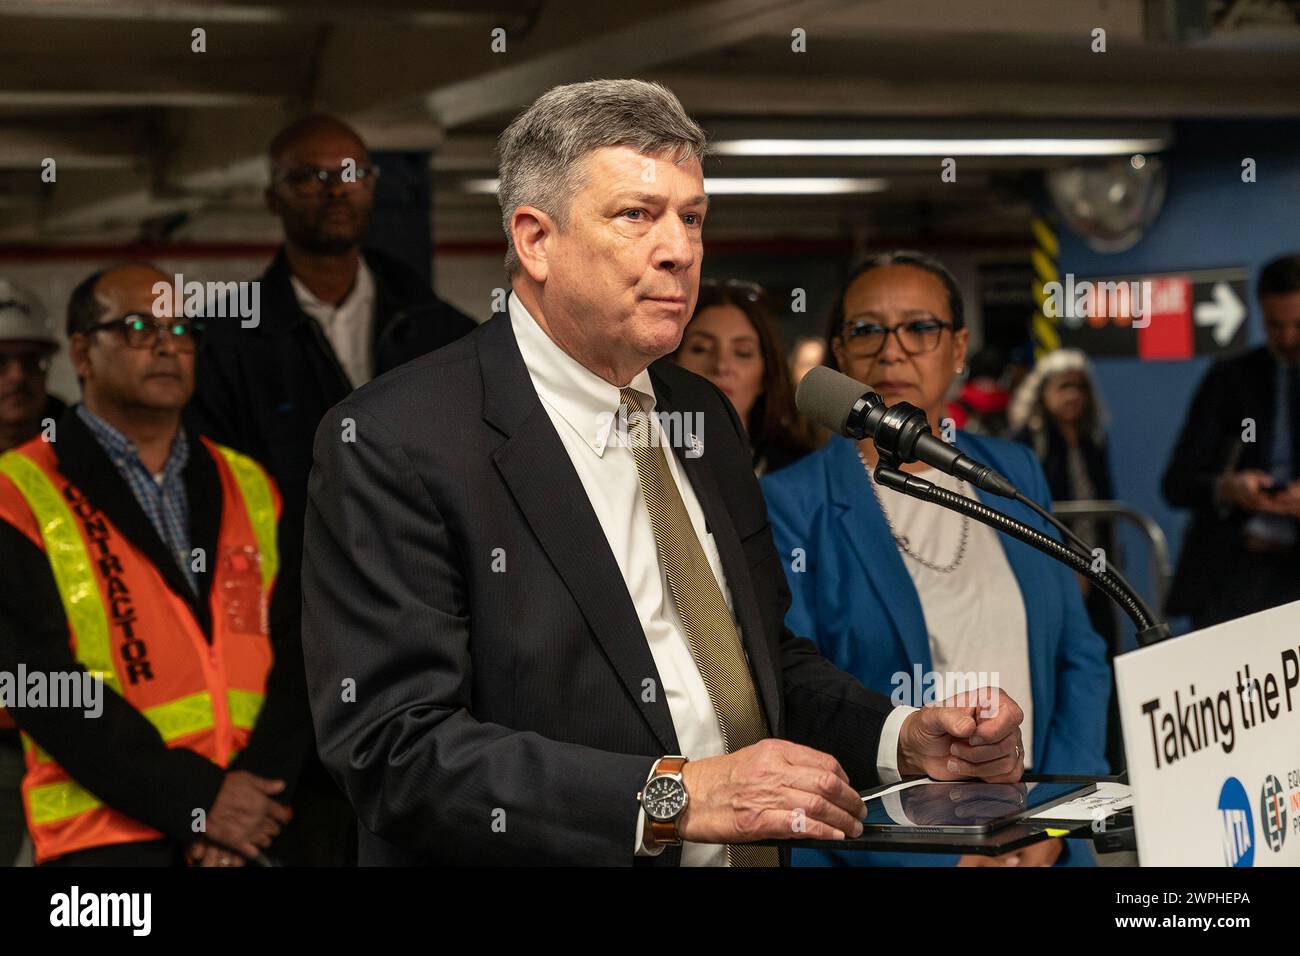 New York, New York, USA. 7th Mar, 2024. John Porcari, Equity in Infrastructure Project Co-Founder and Former U.S. Deputy Secretary of Transportation speaks during MTA announcement at 14th street subway station in New York. Dorval Carter Jr., Chicago Transit Authority President and Equity in Infrastructure Project Co-Chair, John Porcari, Equity in Infrastructure Project Co-Founder and Former U.S. Deputy Secretary of Transportation, Phillip Washington, Denver International Airport CEO and Equity in Infrastructure Project Chair, Janno Lieber, MTA Chair and CEO signed a pledge to promote Stock Photo